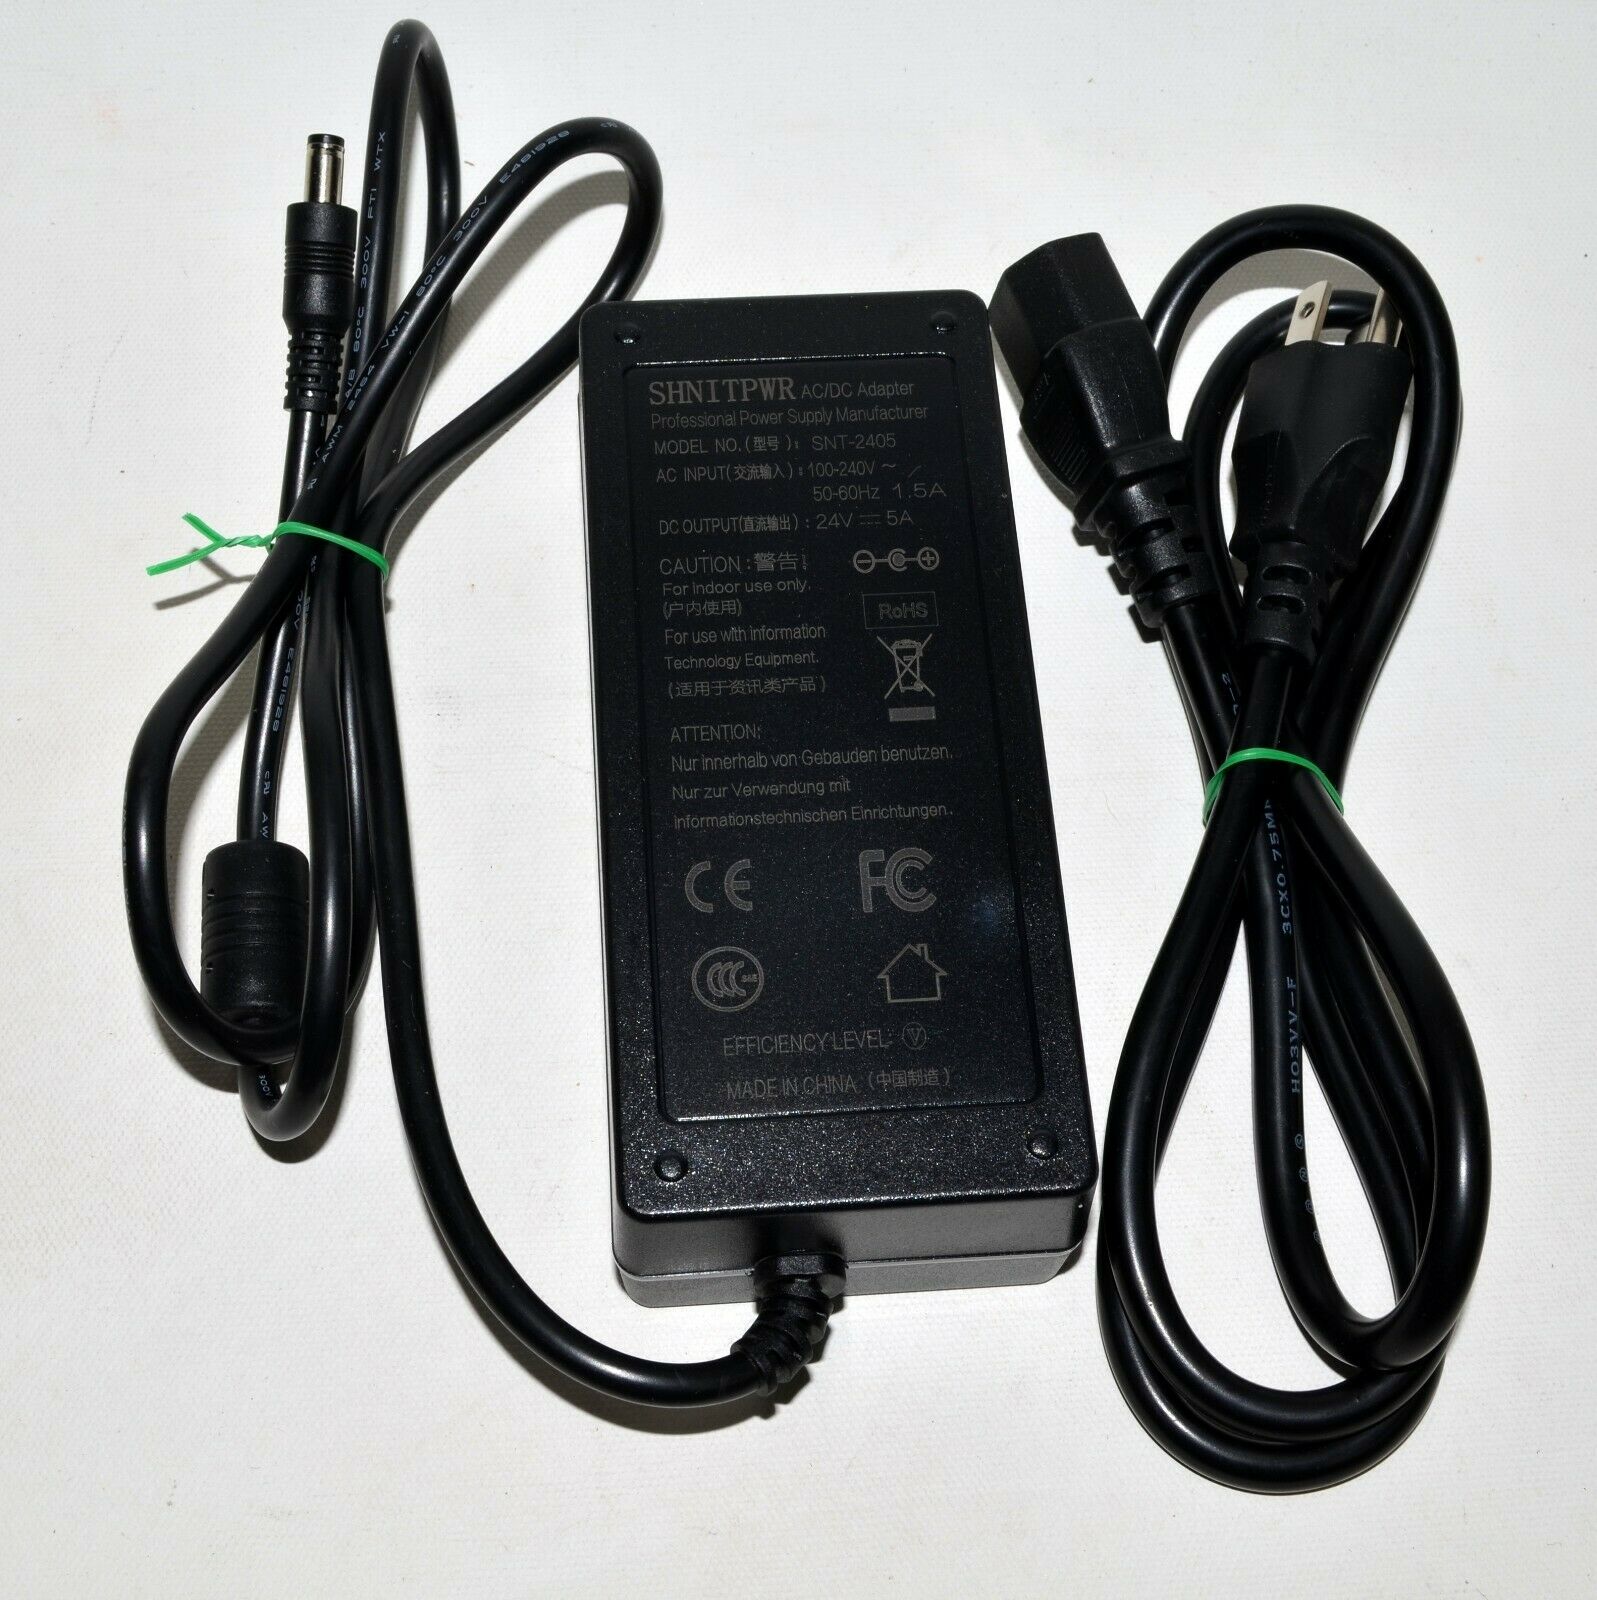 65W AC Adapter Charger Power Supply Cord For NB-65B19 773000-31L 4 POS Printers Brand Unbranded/Generic Bundled Items P